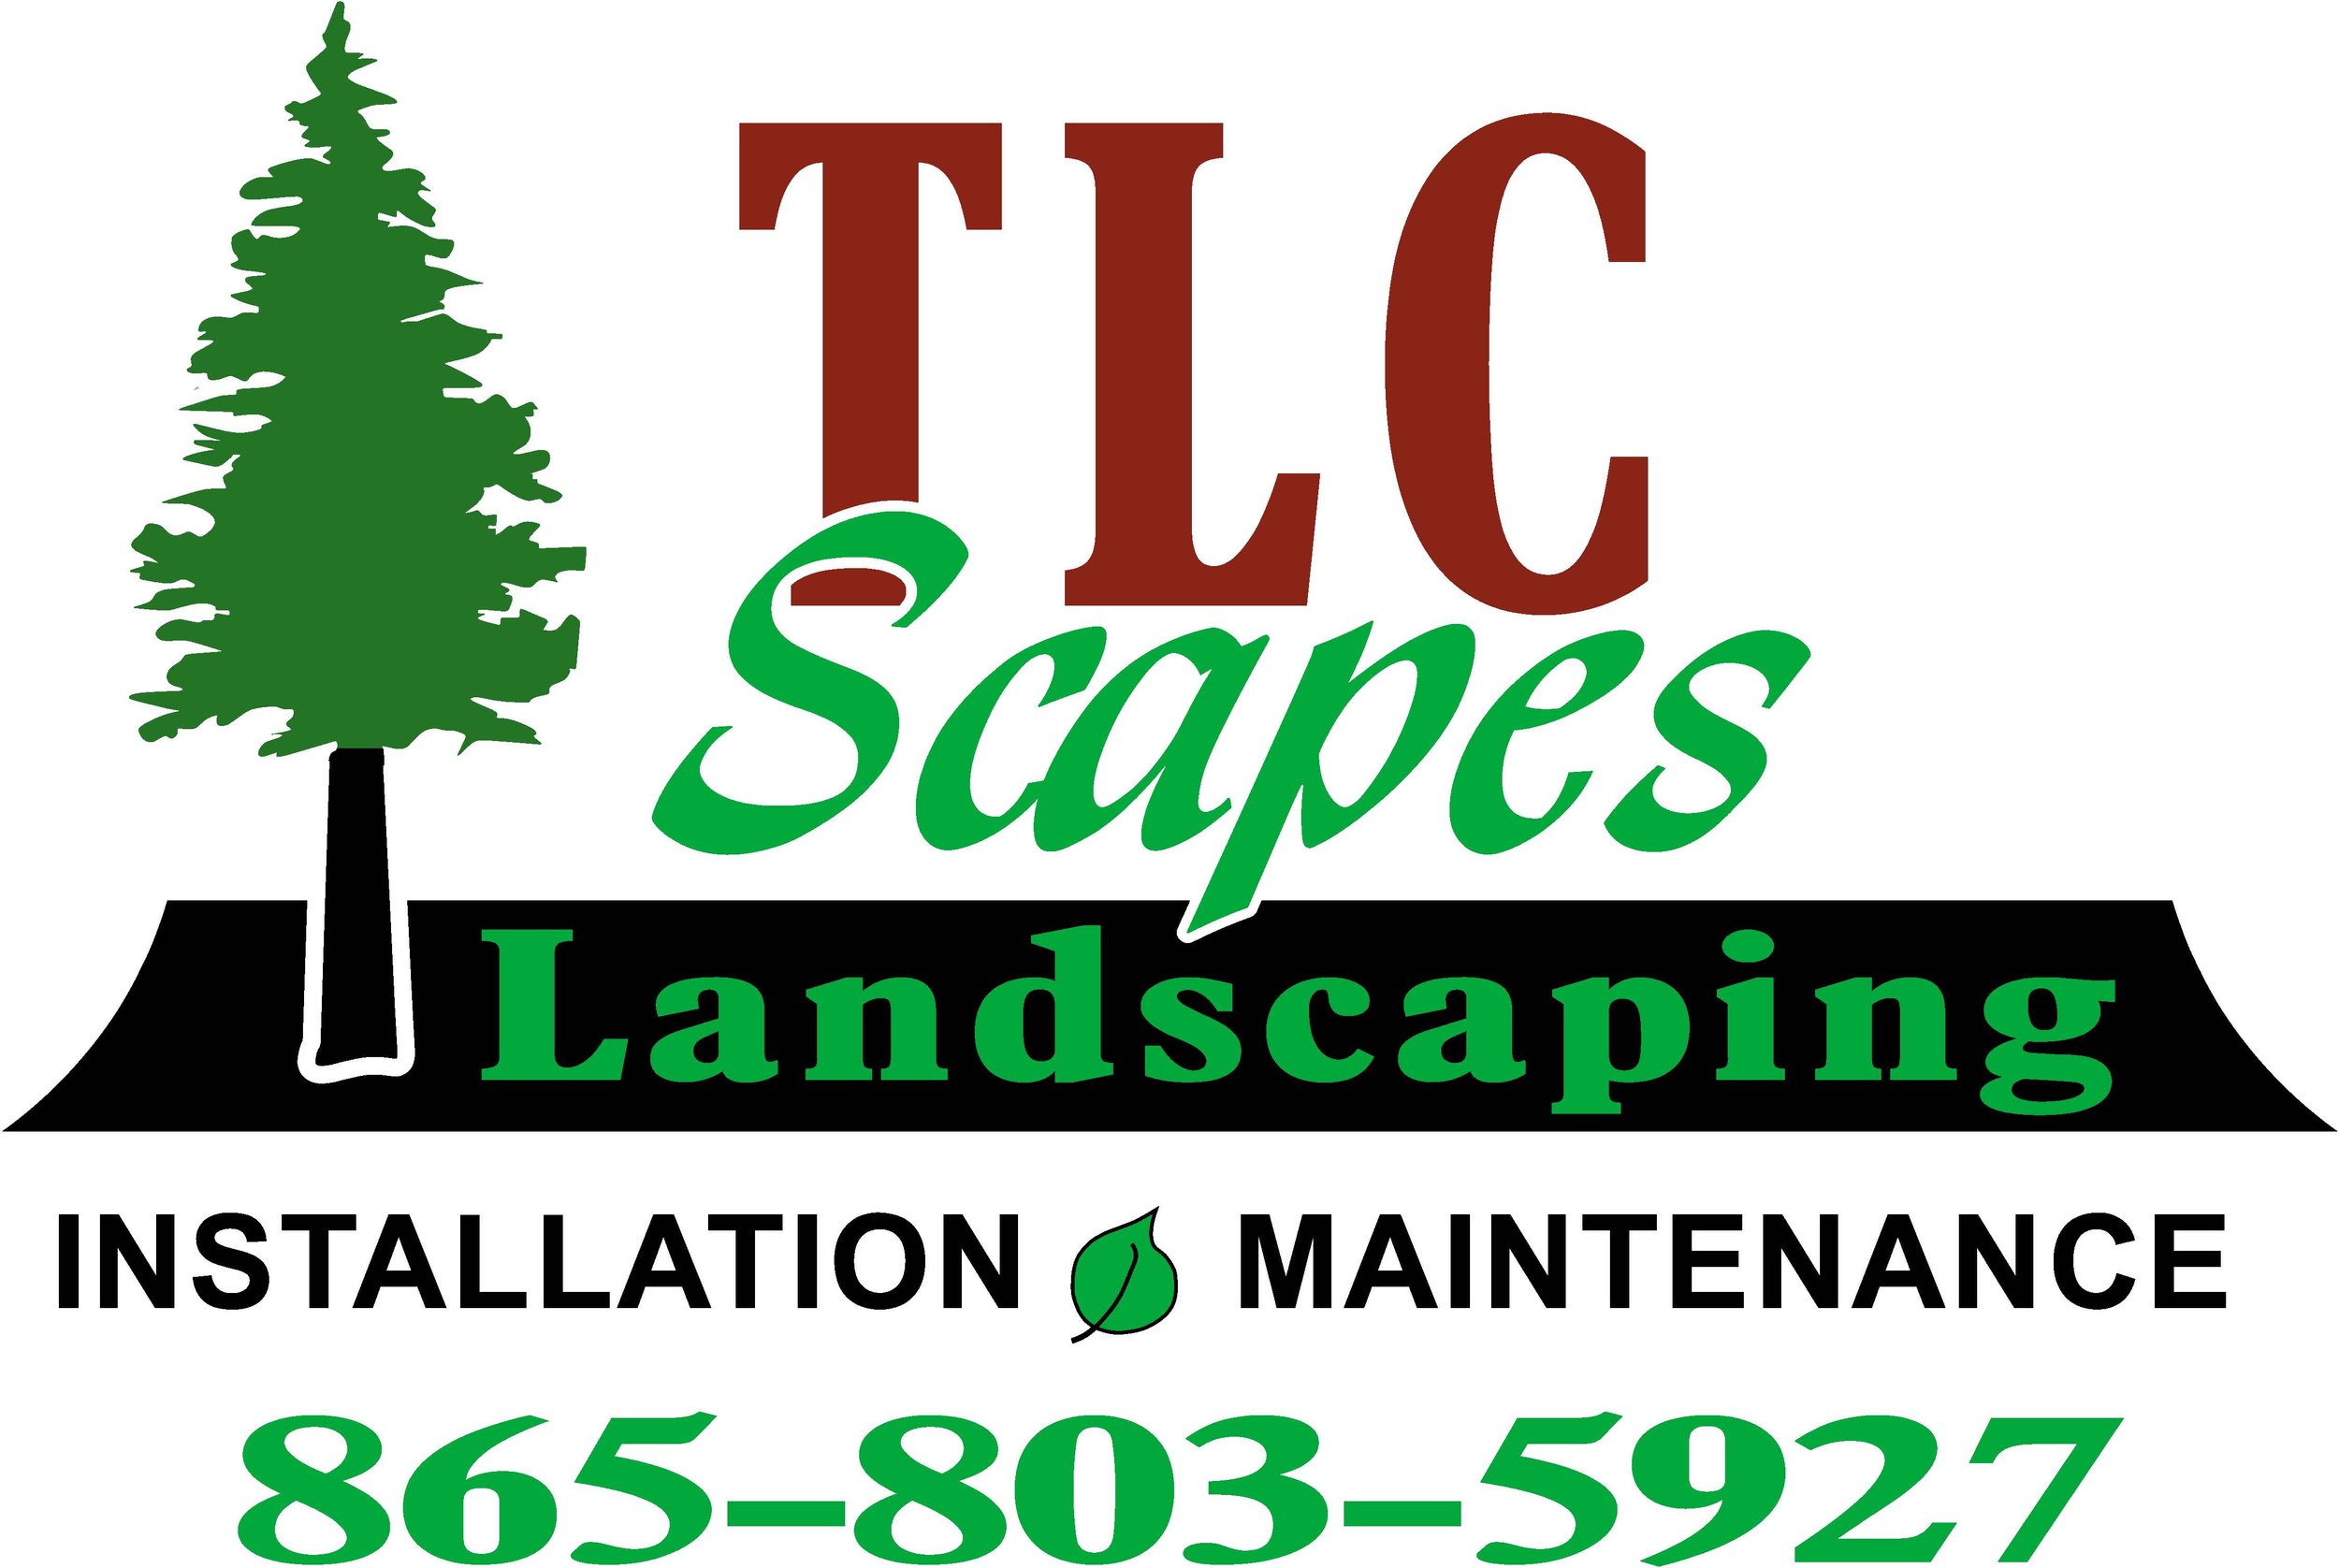 TLC Scapes.jpg